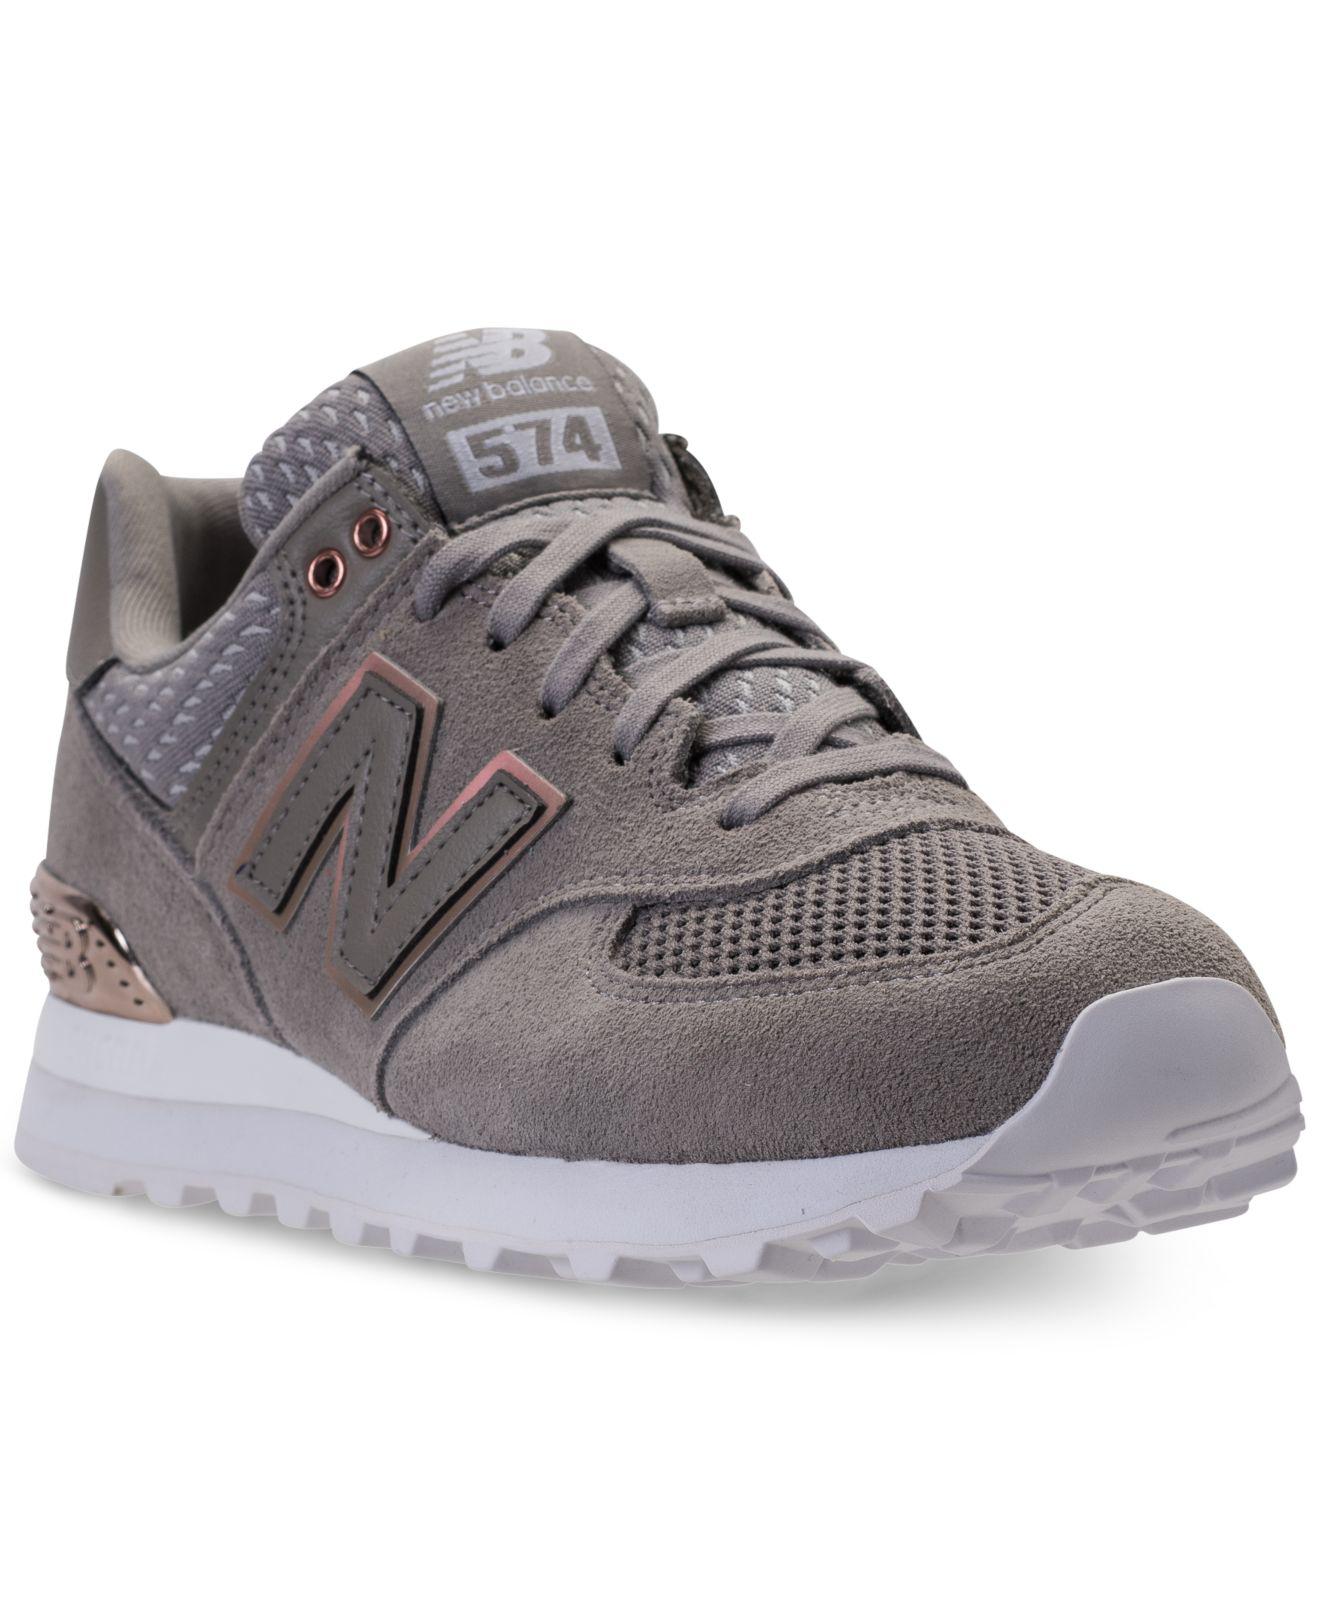 New Balance Women's 574 Rose Gold Casual Sneakers From Finish Line Poland,  SAVE 47% - wp.brentharley.com